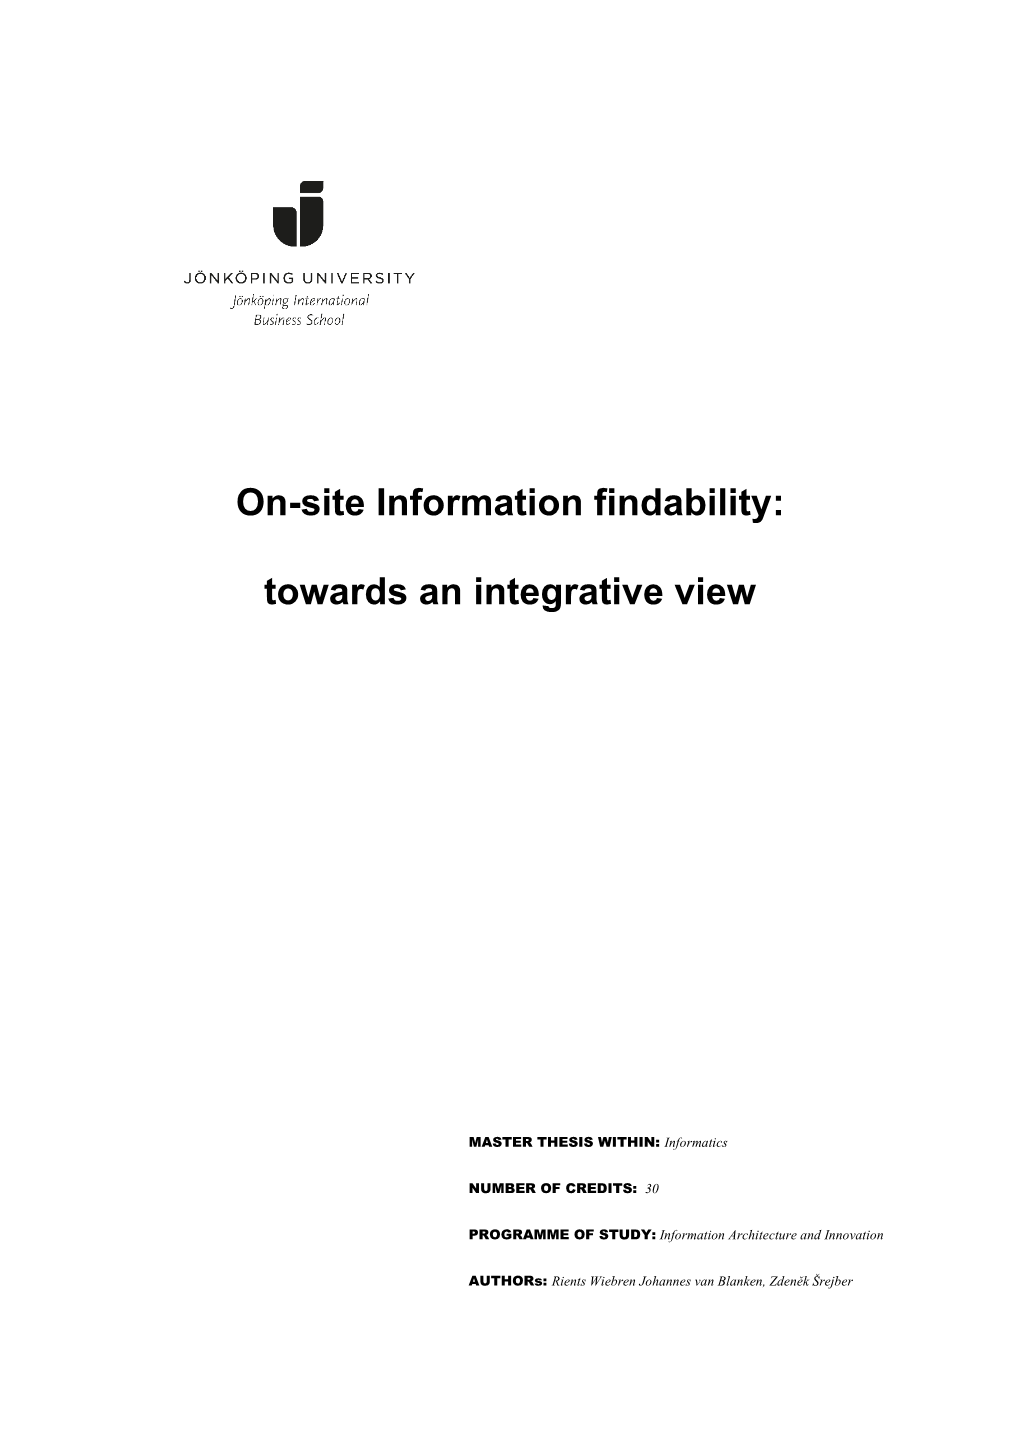 On-Site Information Findability